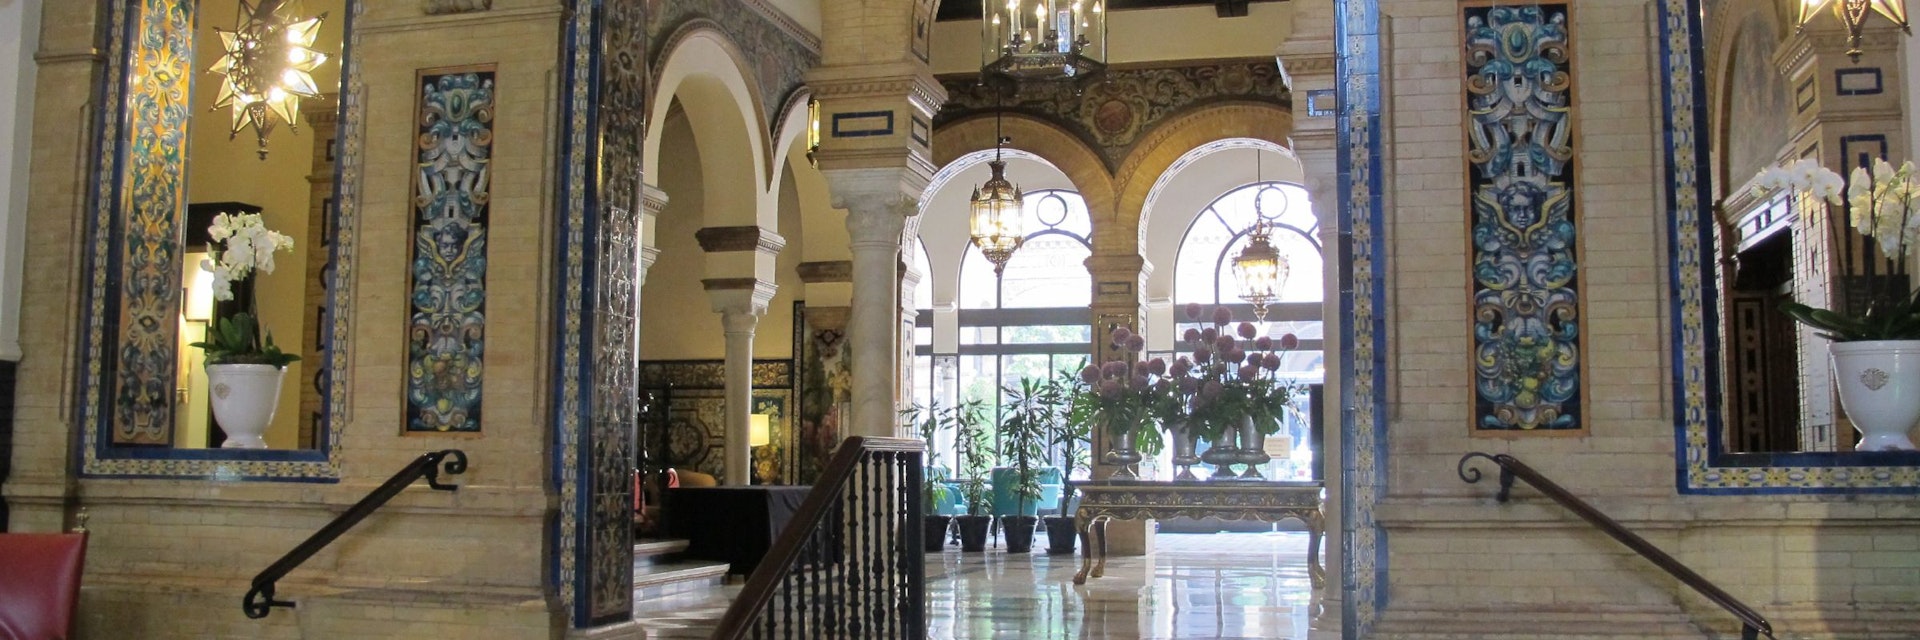 Hotel Alfonso XIII lobby with marble steps and ceramic tiles